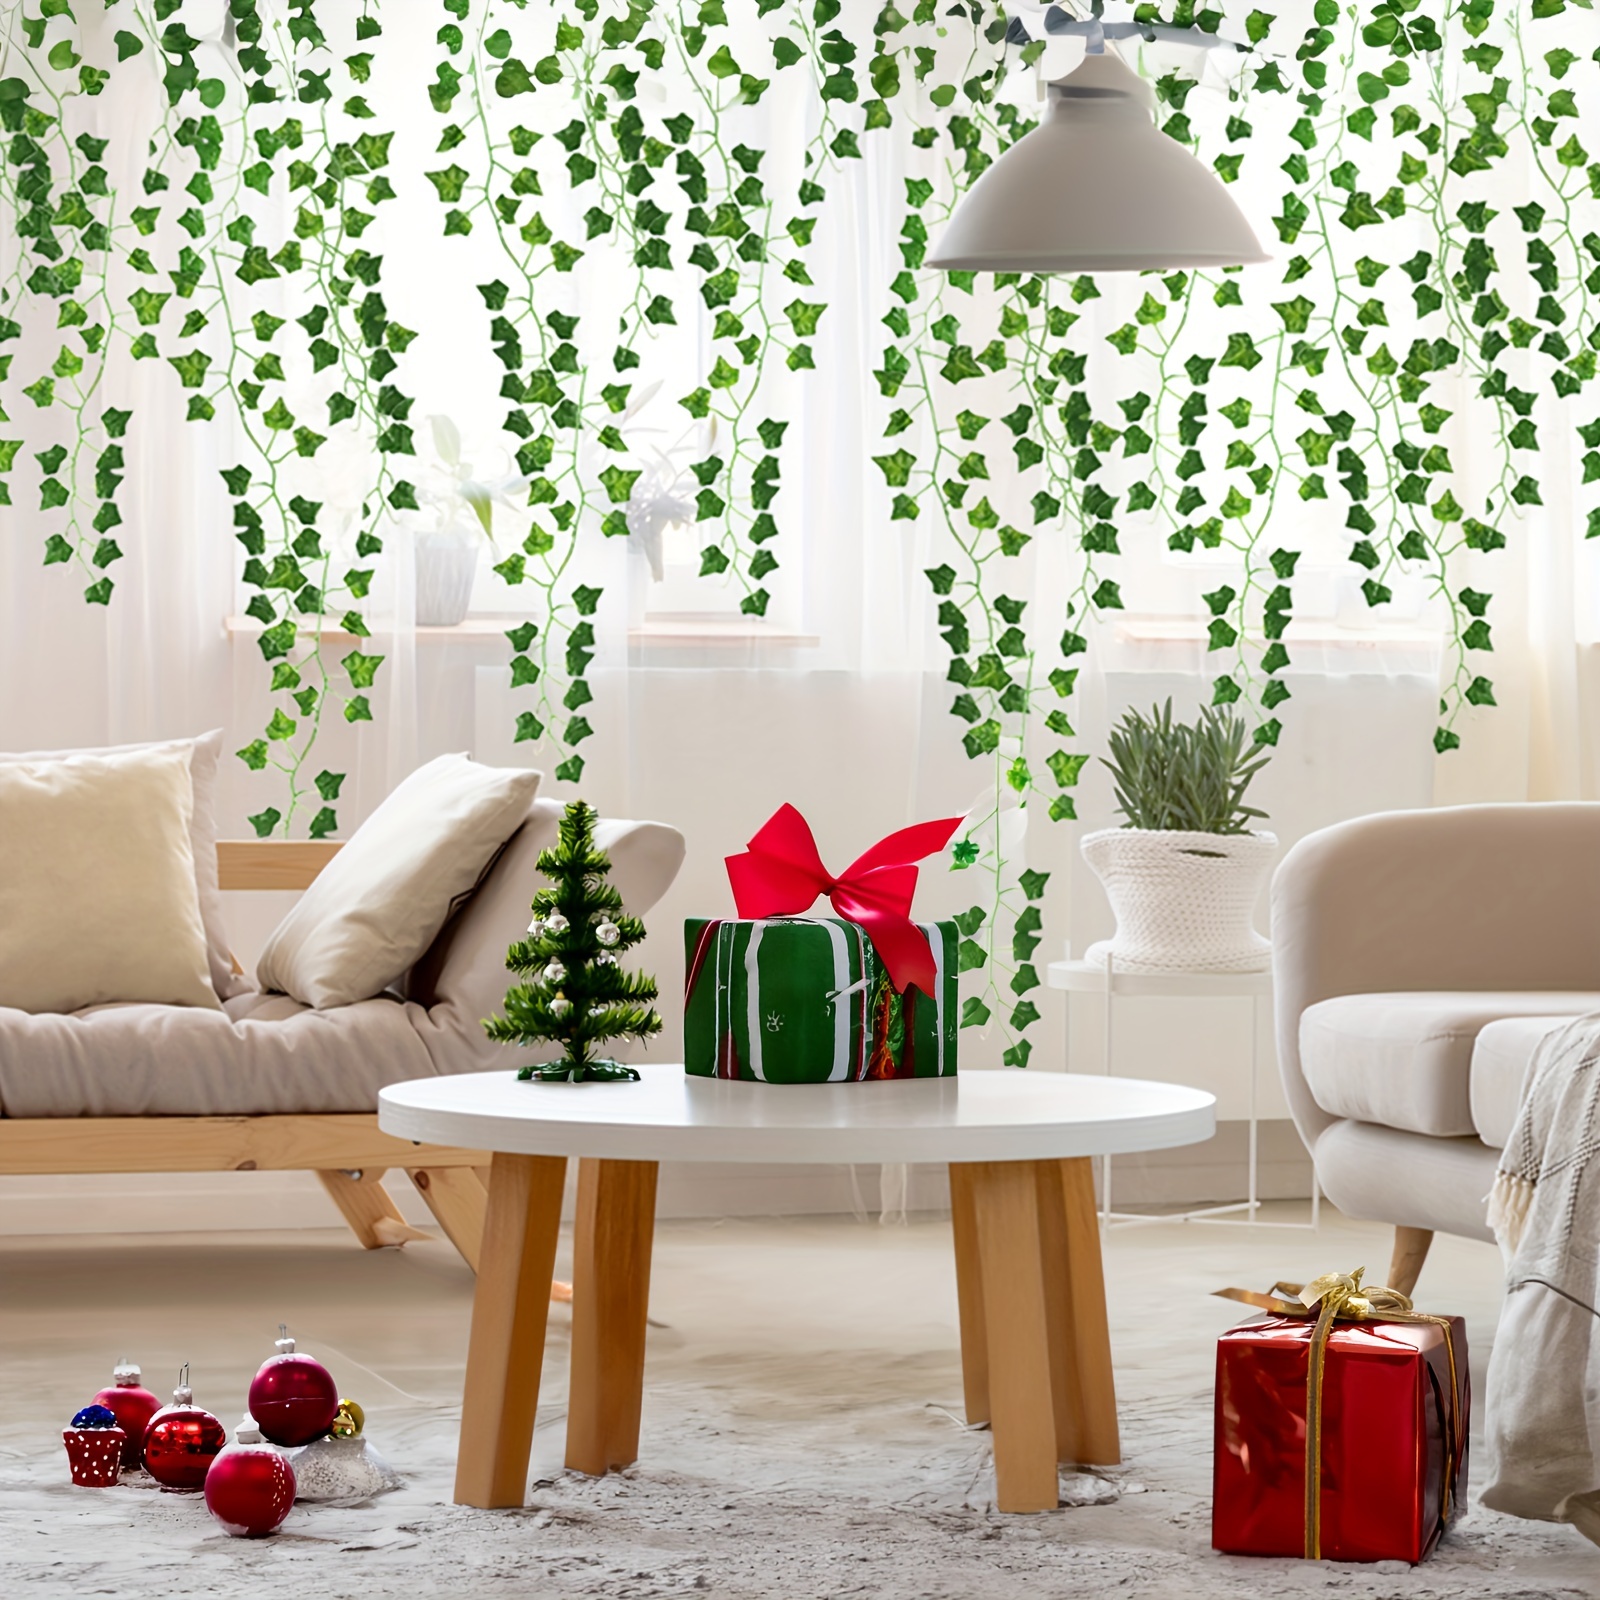 Fake Ivy Leaves, Artificial Ivy Greenery Vines For Room Decor ...